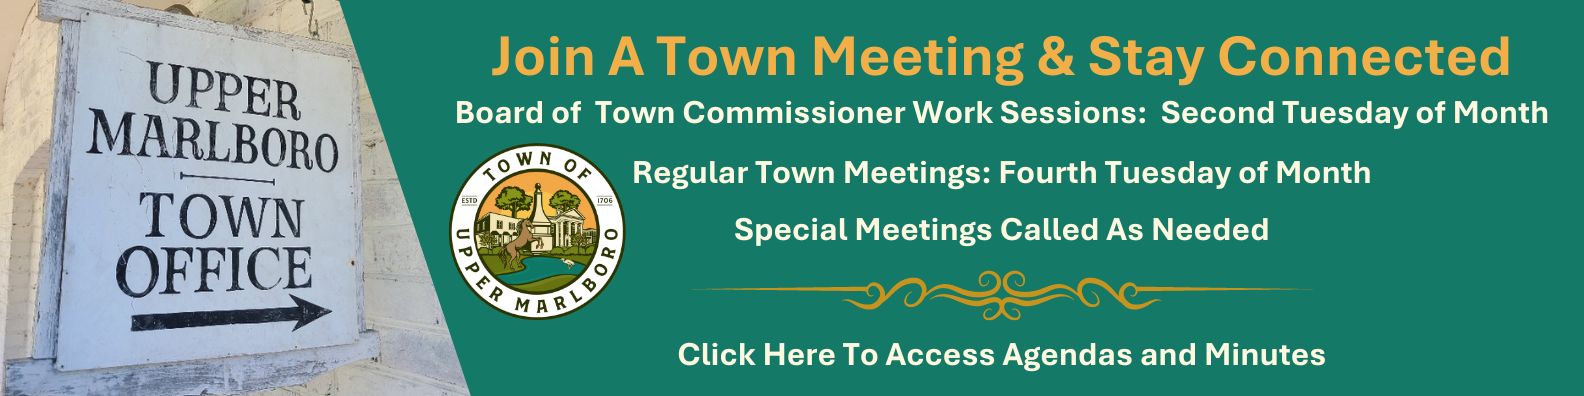 Join A Town Meeting Final